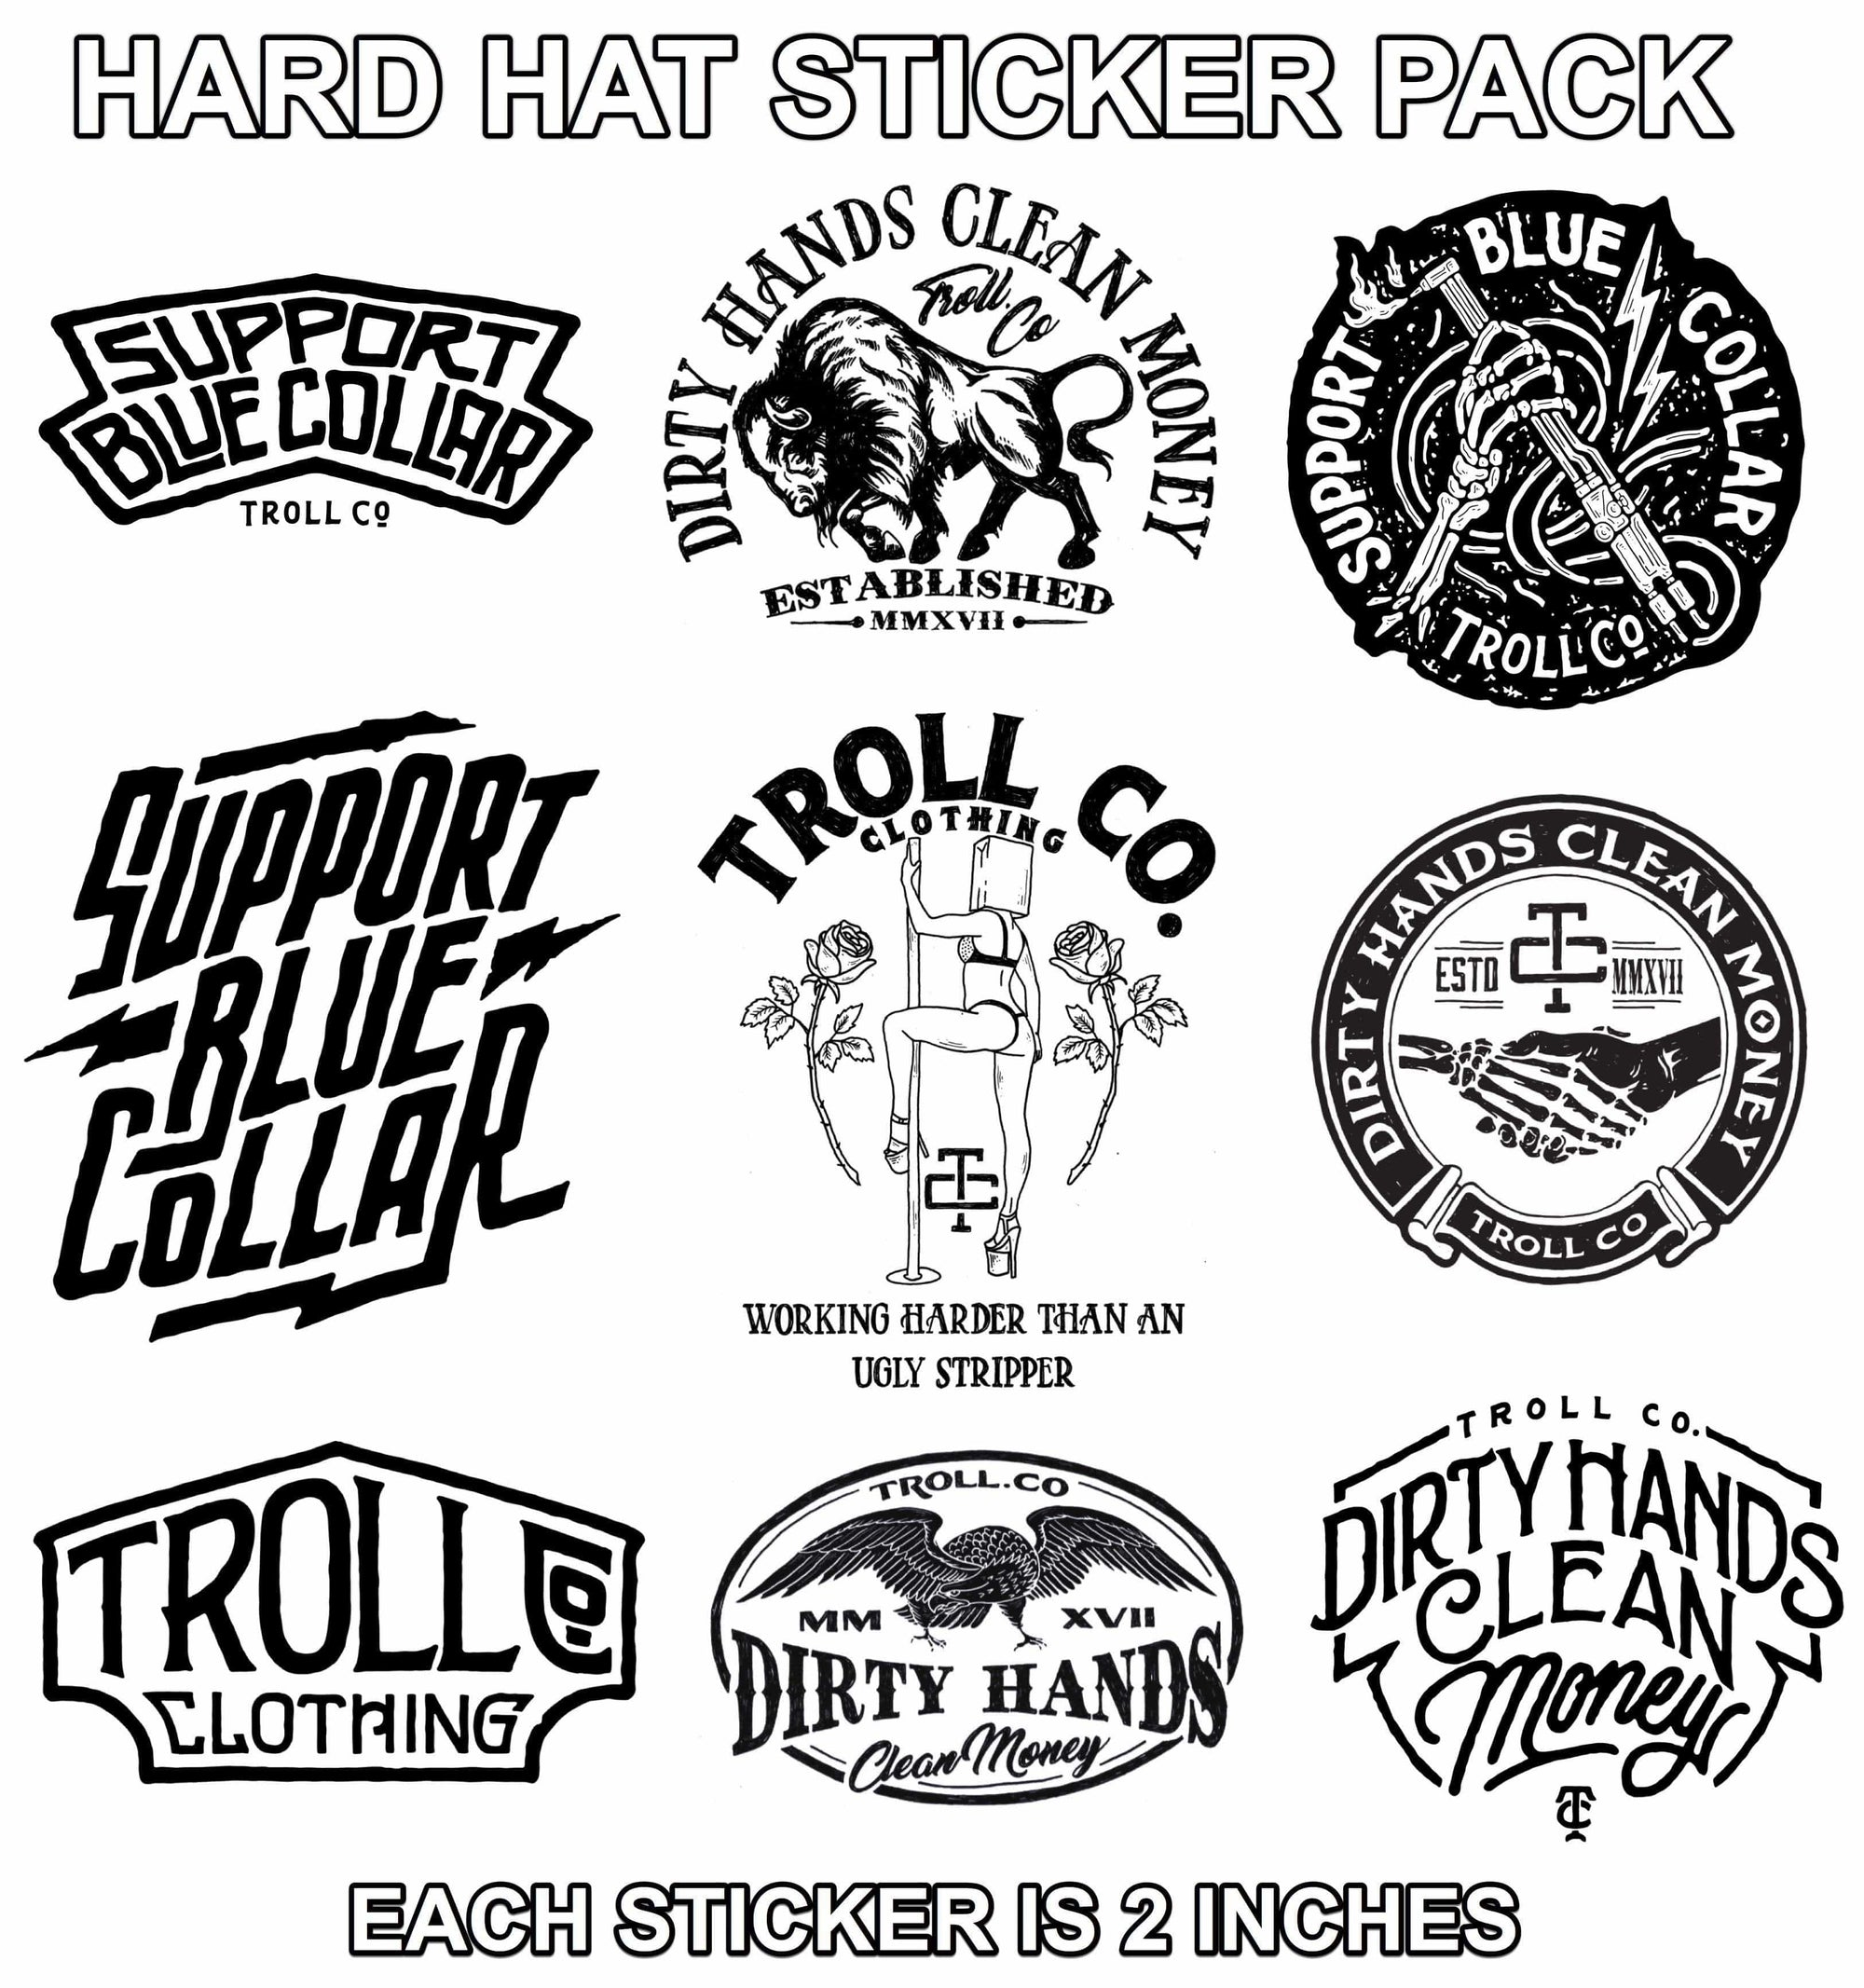 Clear Throwback Hard Hat Sticker Pack